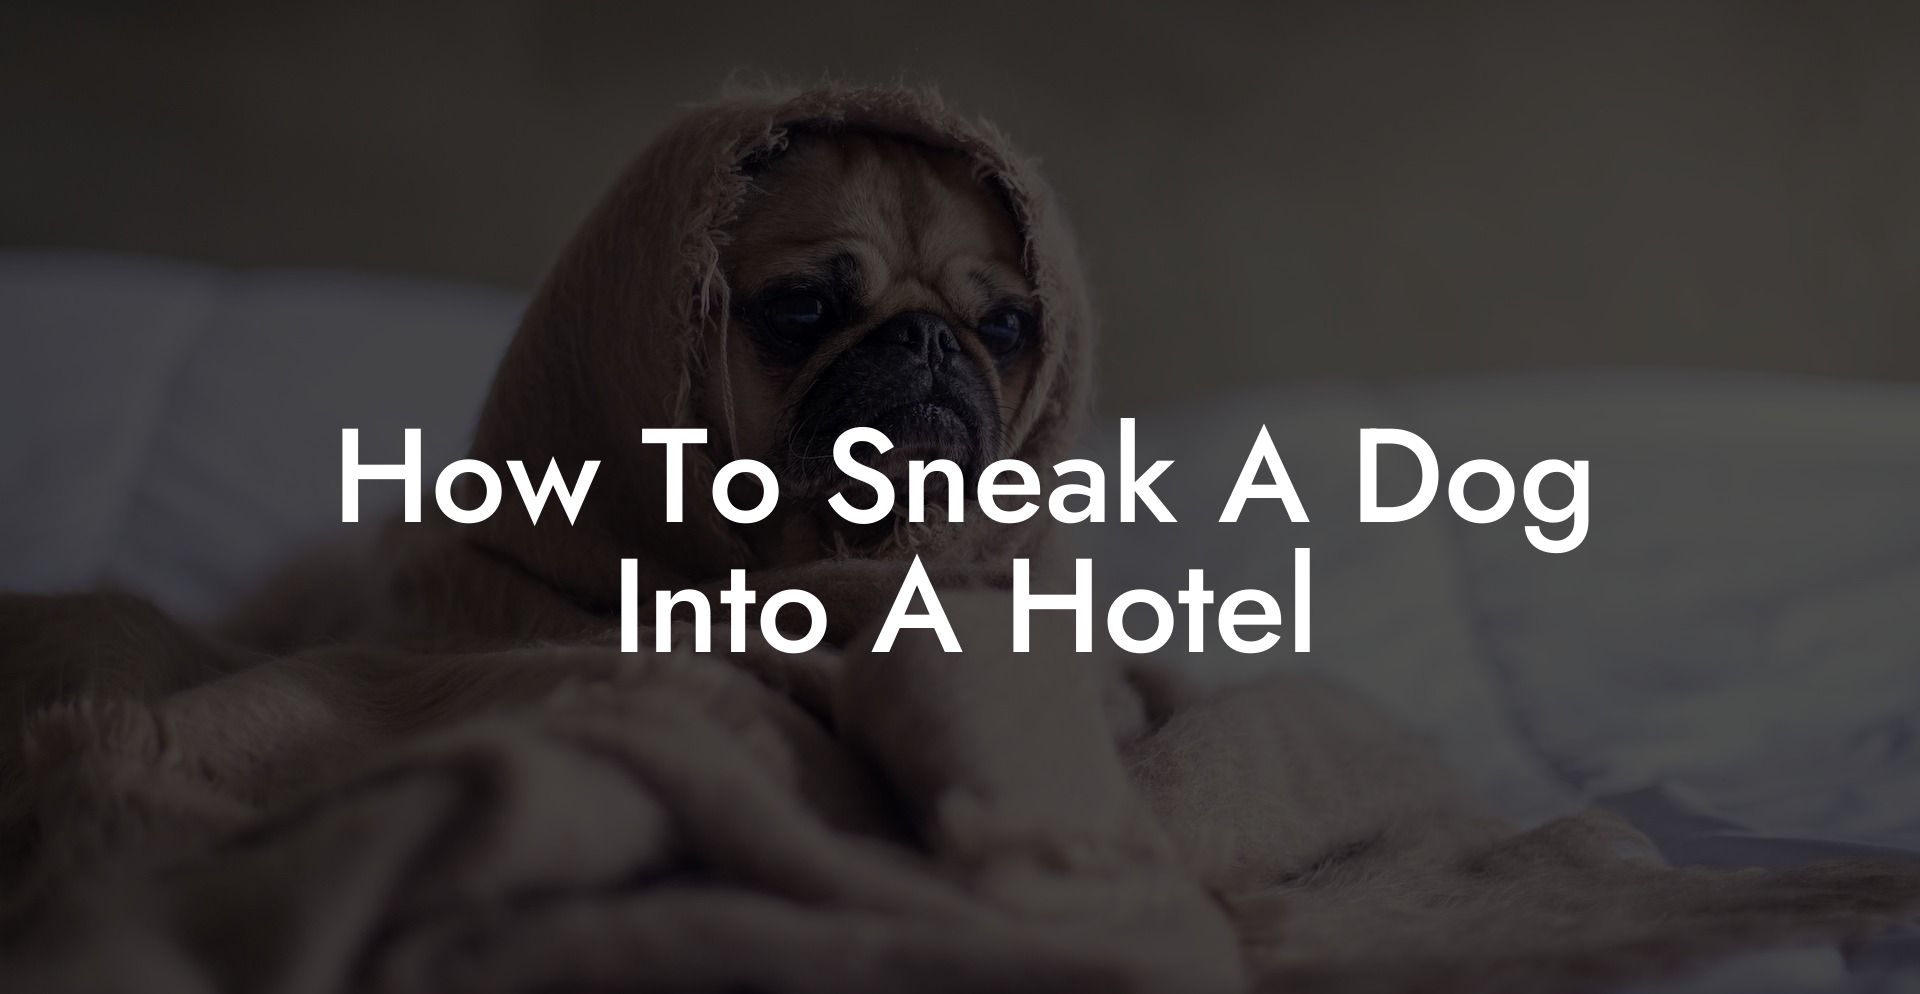 How To Sneak A Dog Into A Hotel